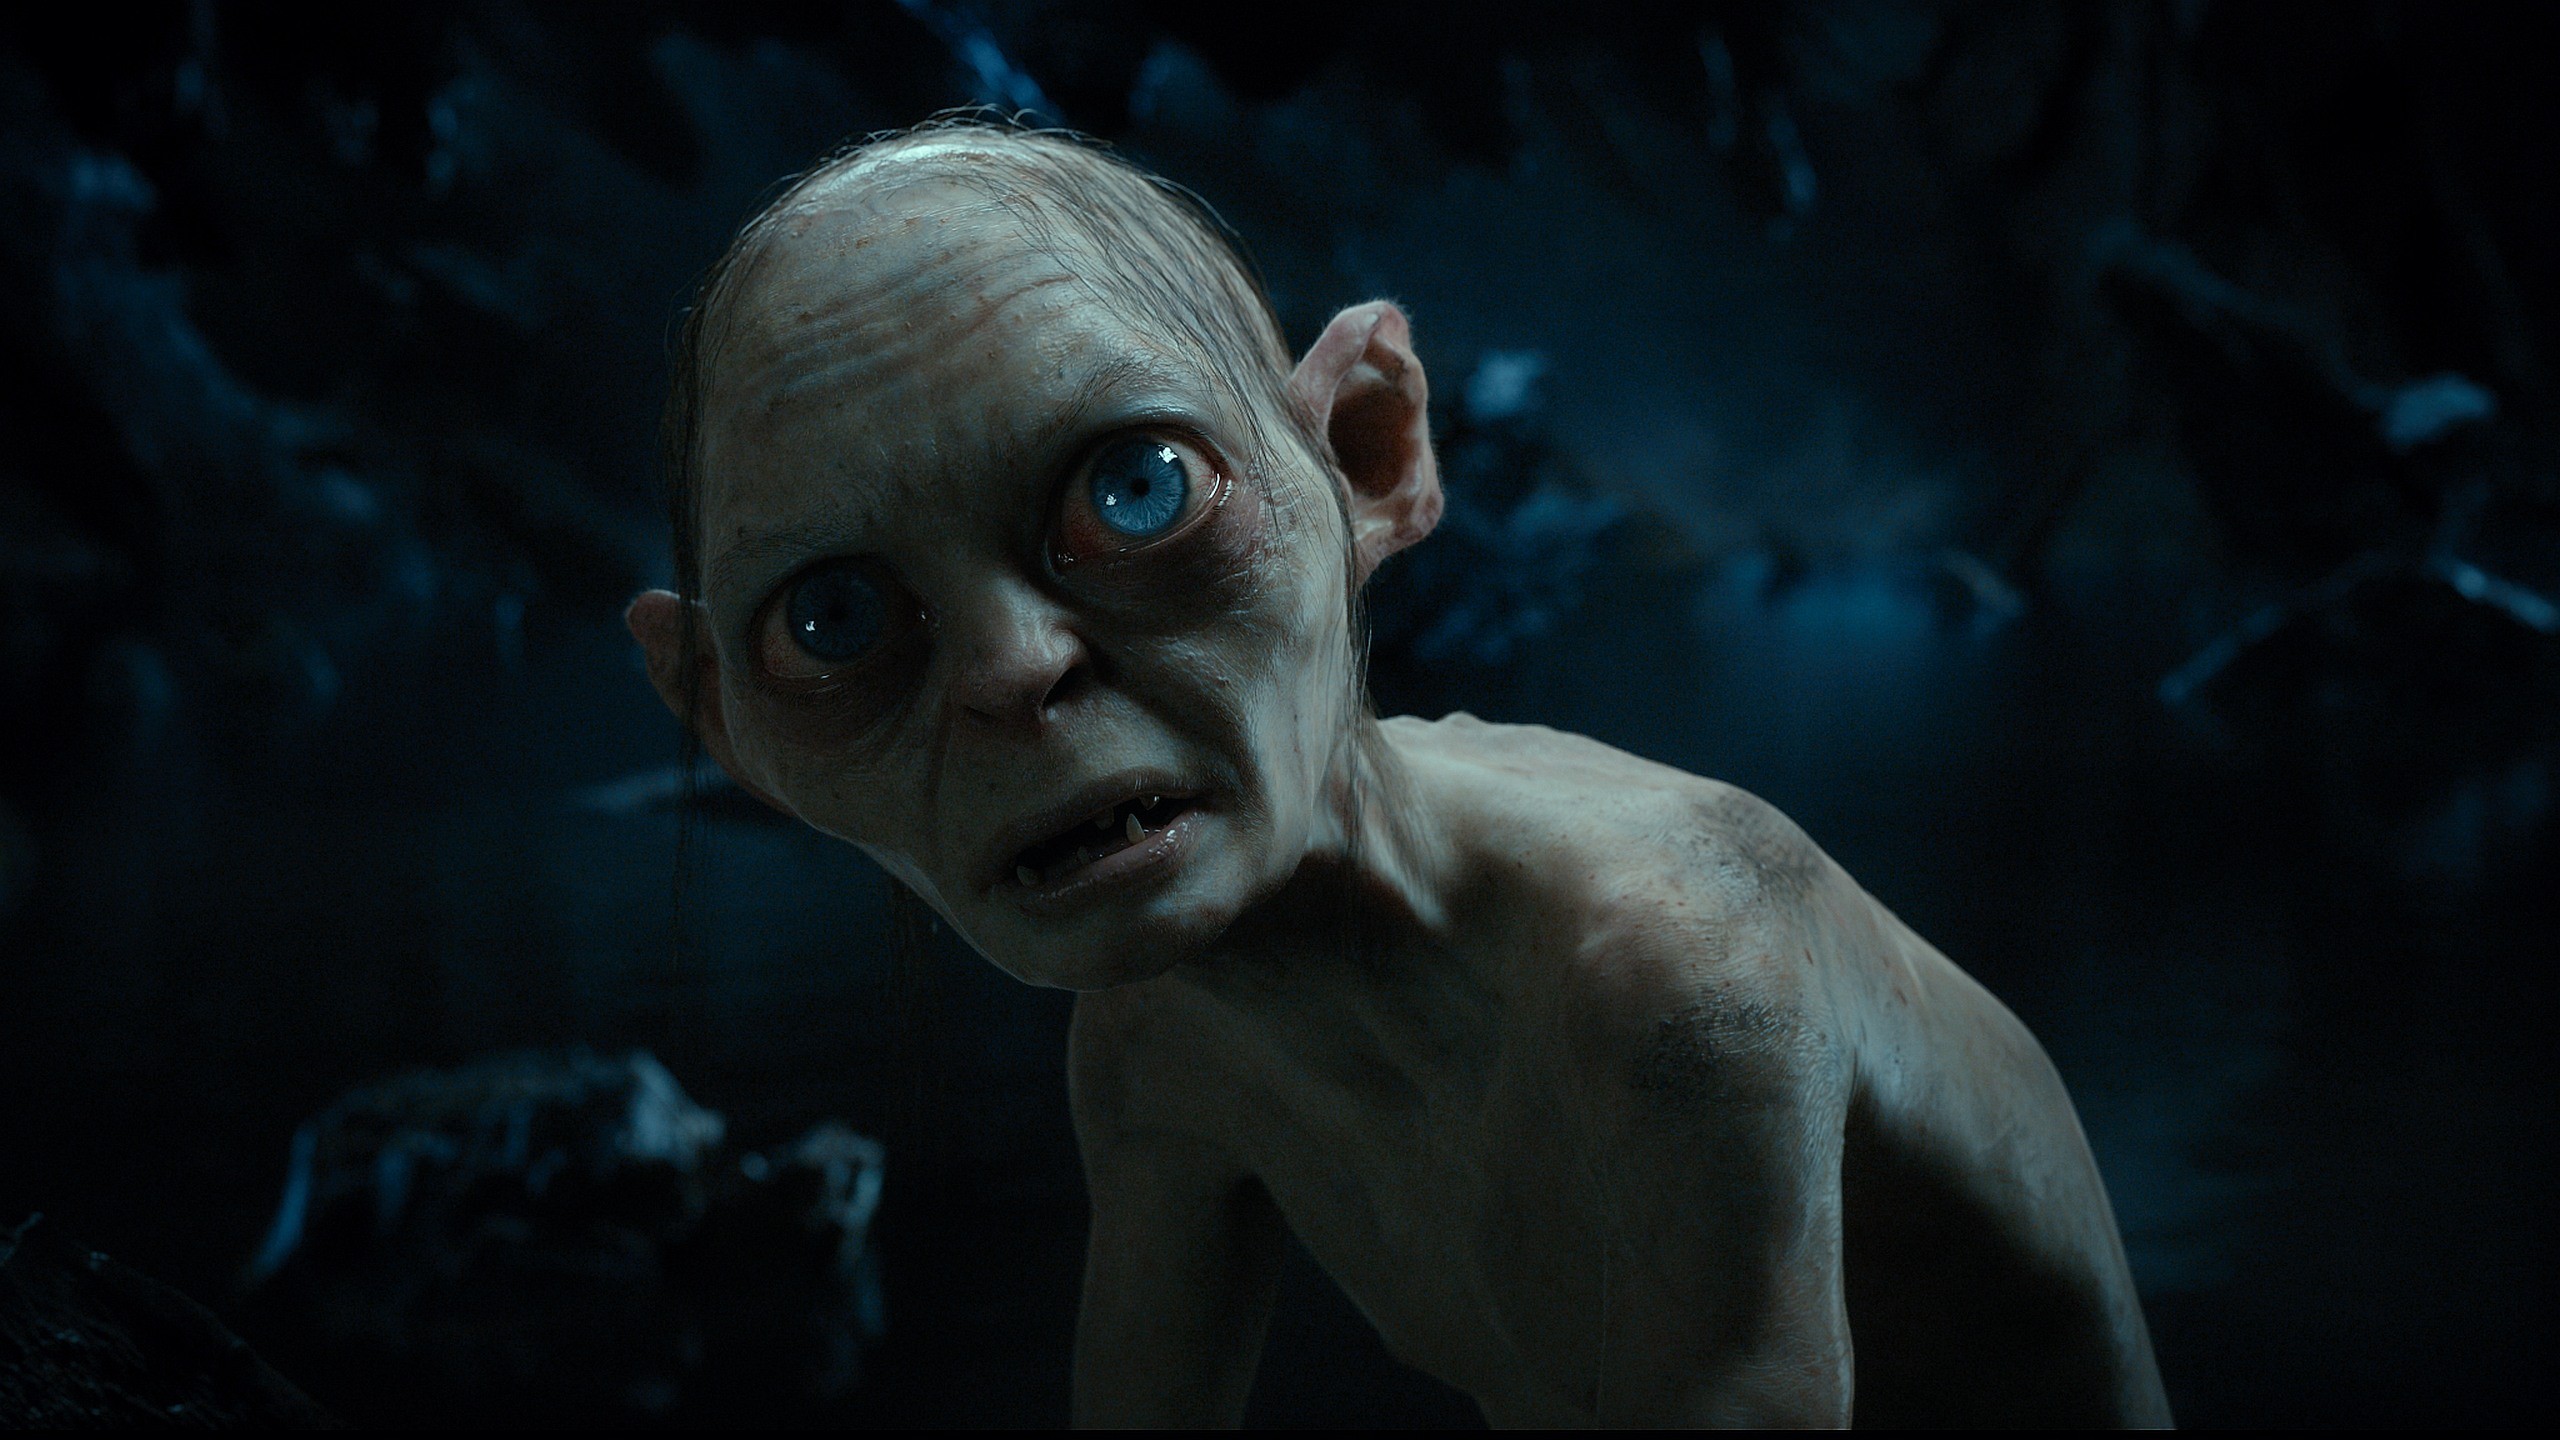 Gollum the hobbit wallpapers hd desktop and mobile backgrounds